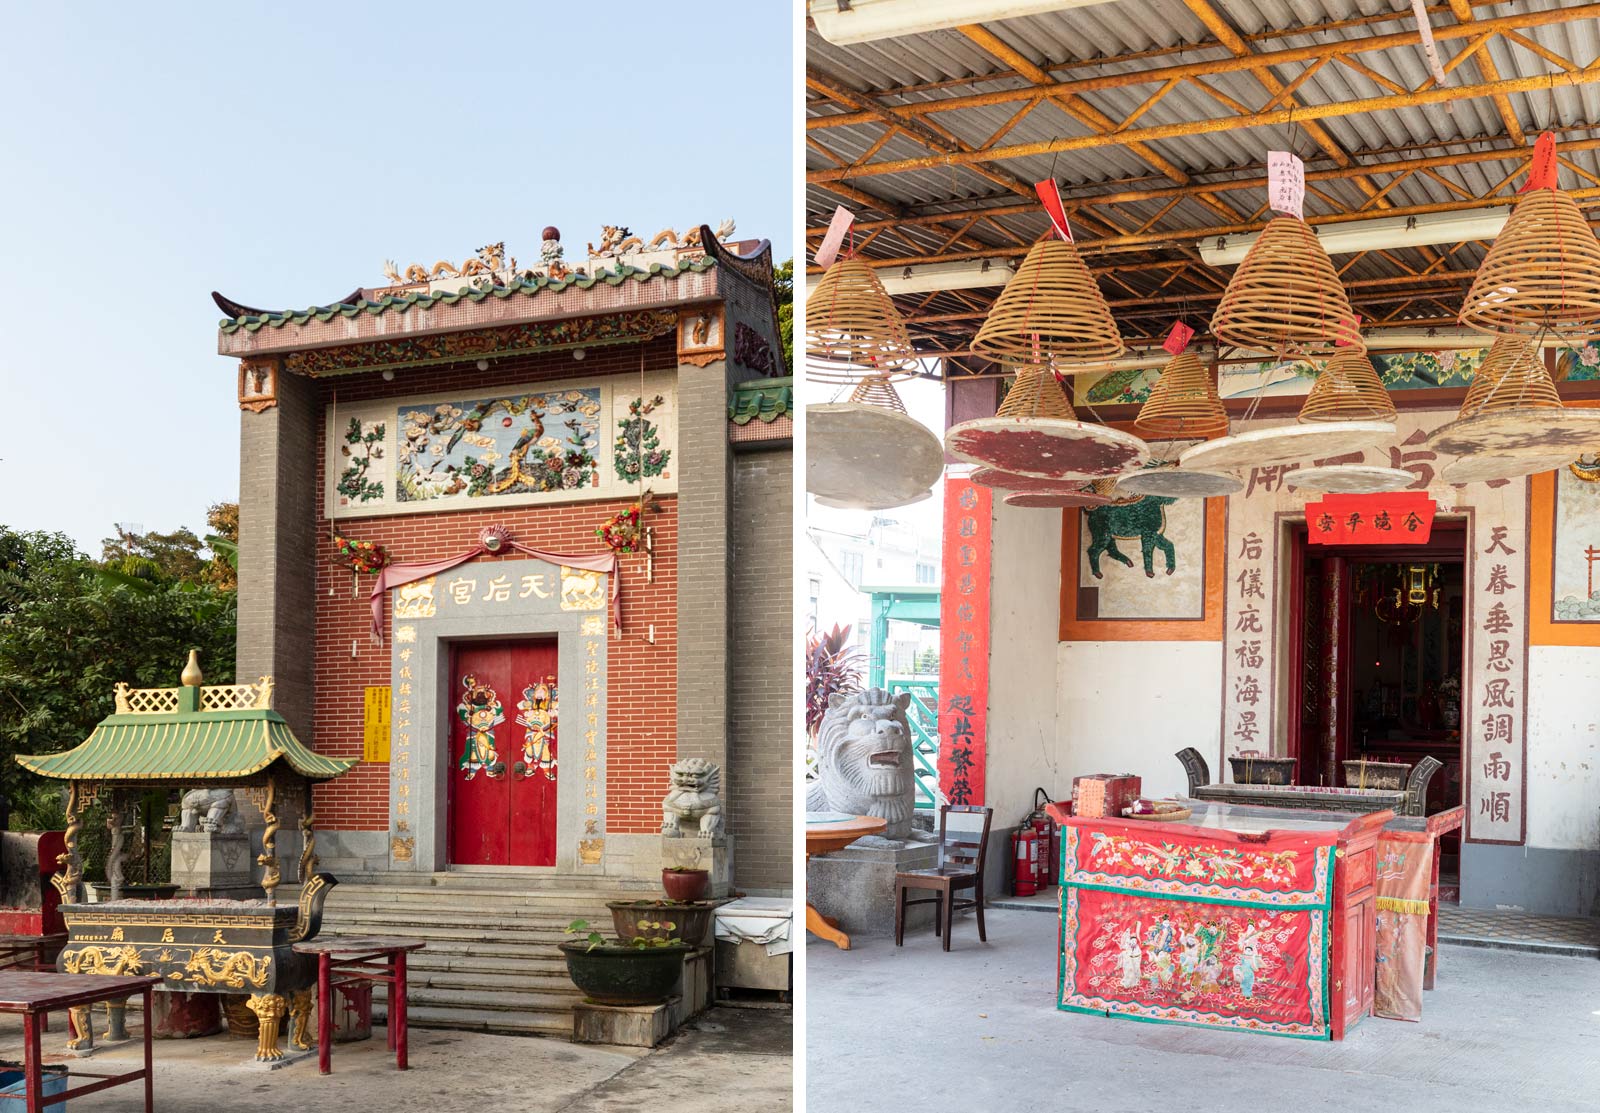 Entrance to two of the many picturesque temples dedicated to Tin Hau, the goddess of the sea, on Lamma Island